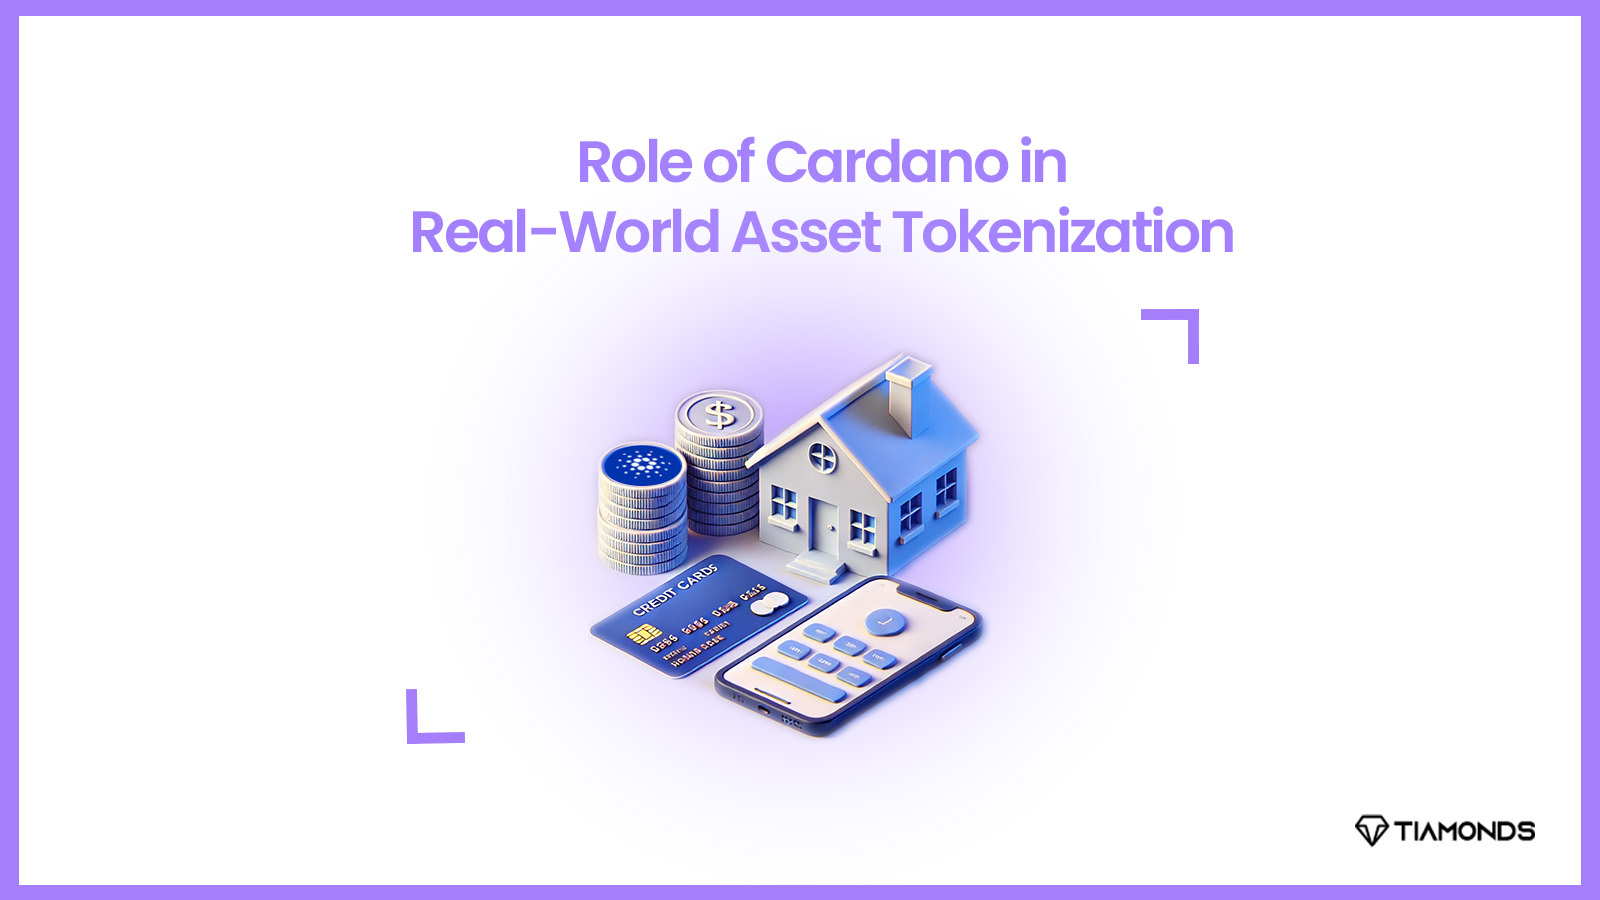 Role of Cardano in Real-World Asset Tokenization